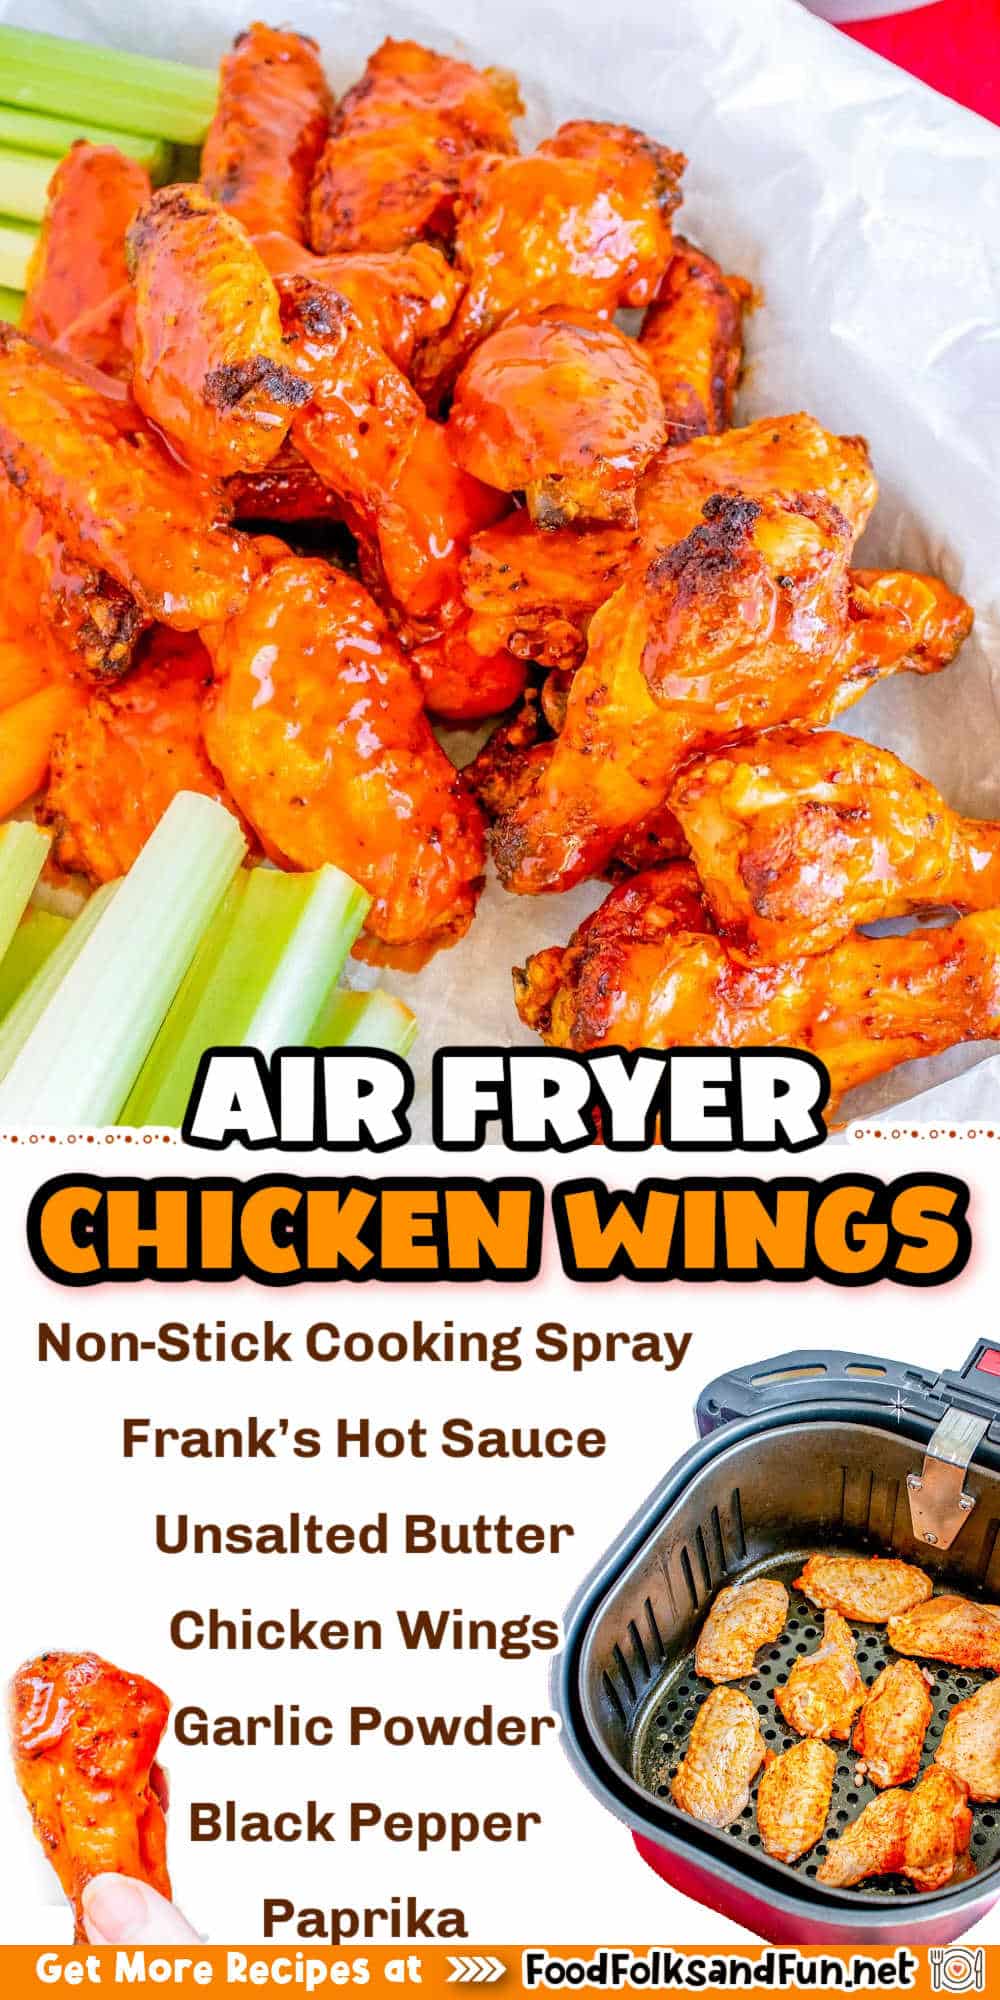 Air Fryer Chicken Wings are crispy and seasoned perfectly. All you need are just 25 minutes to make these irresistible wings! via @foodfolksandfun